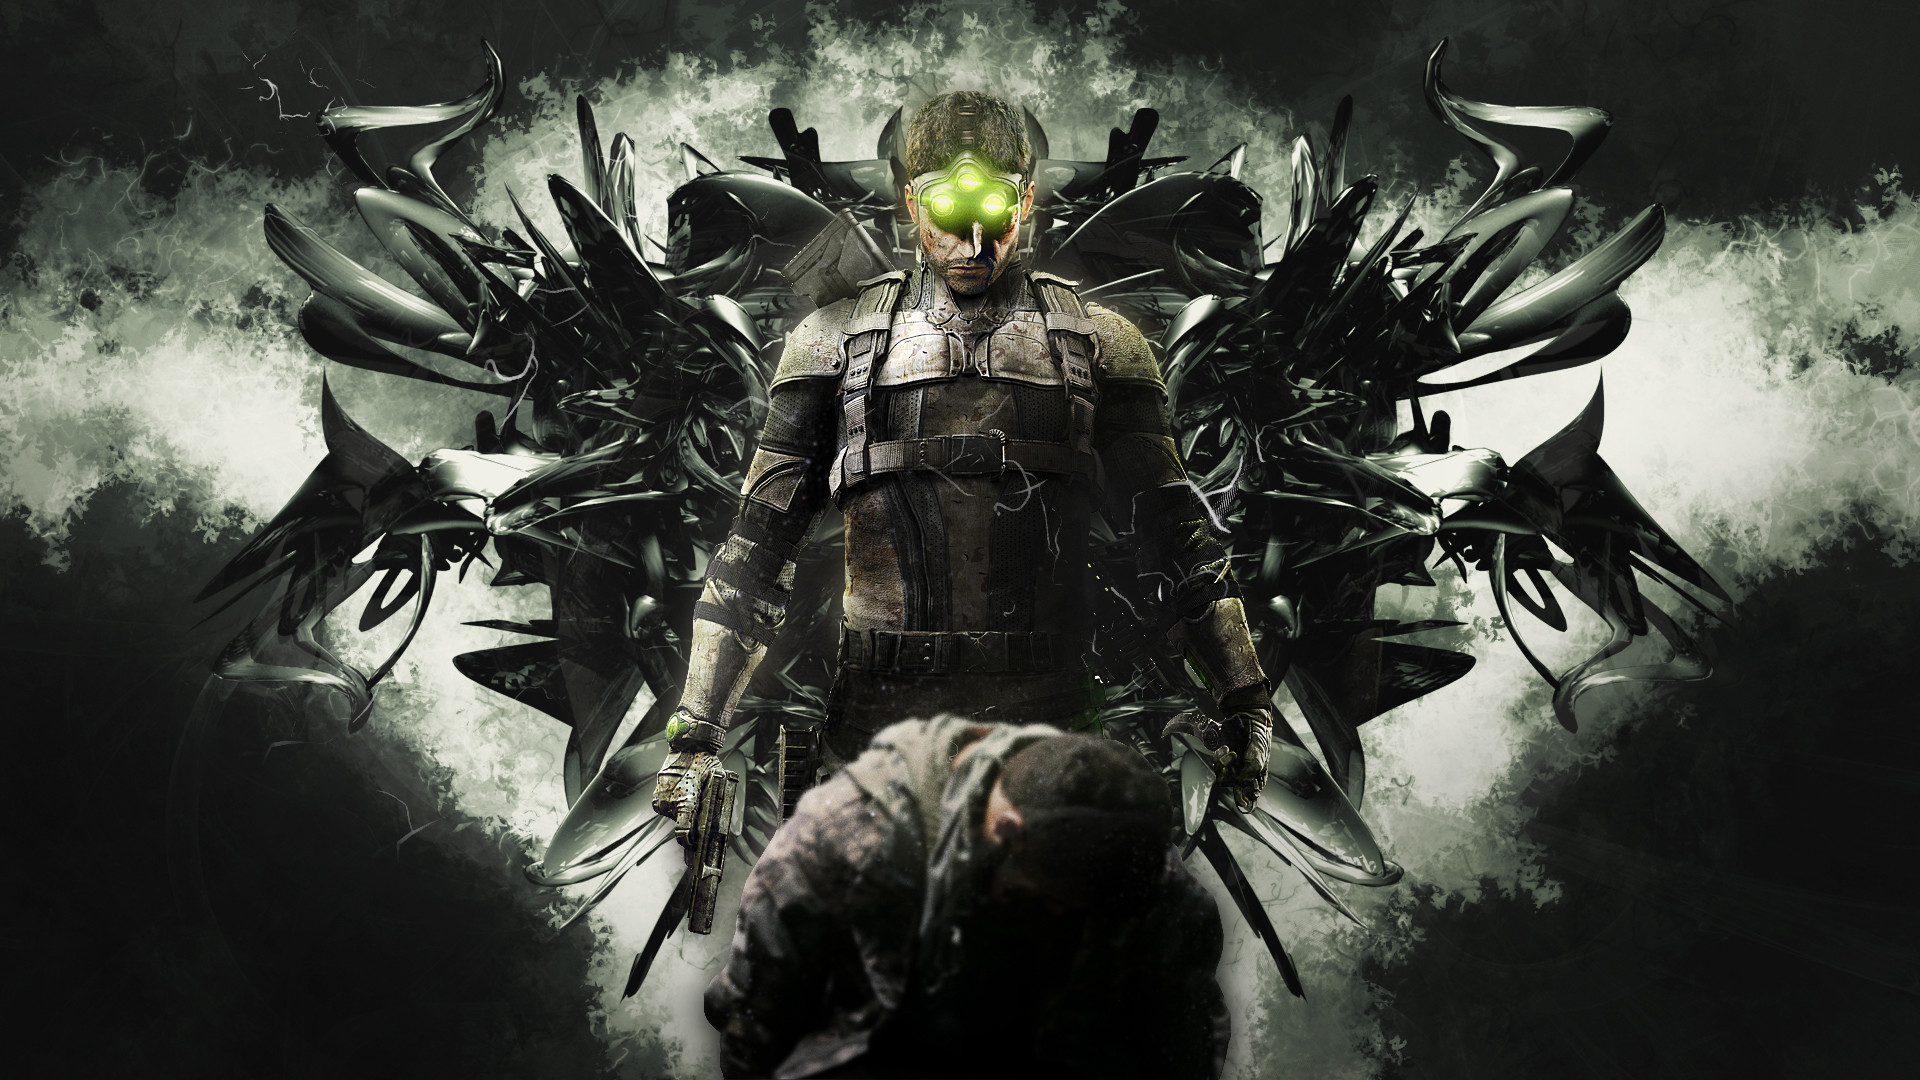 General 1920x1080 video games Splinter Cell Tom Clancy's Splinter Cell Tom Clancy's Splinter Cell: Blacklist gun weapon Ubisoft Sam Fisher video game characters